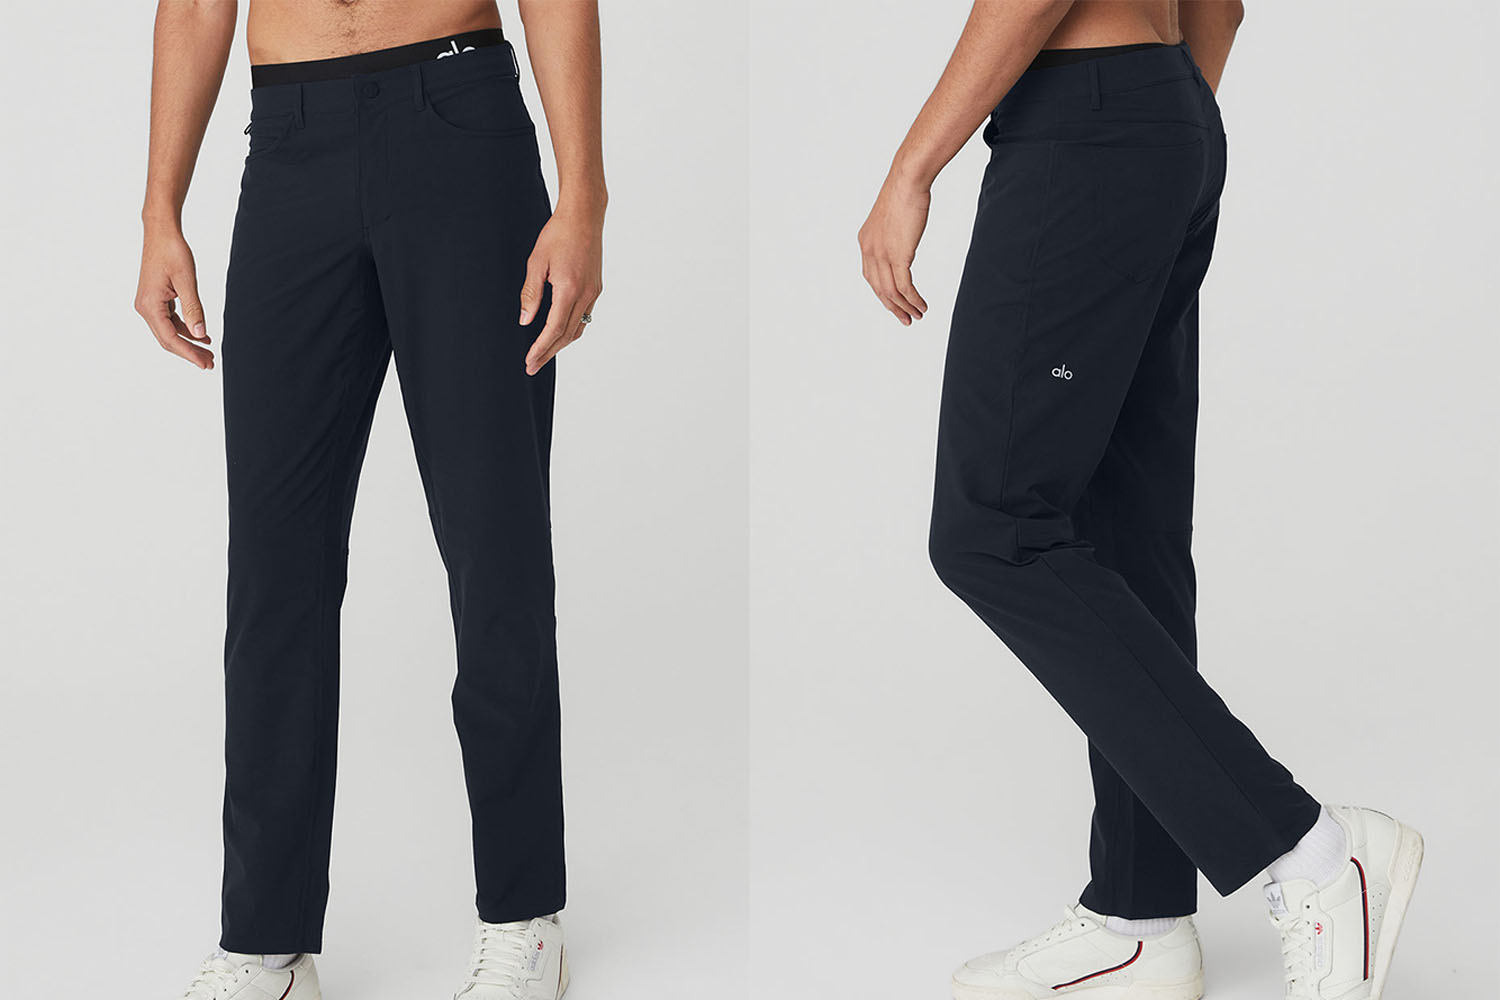 a pair of black workout pants on a model